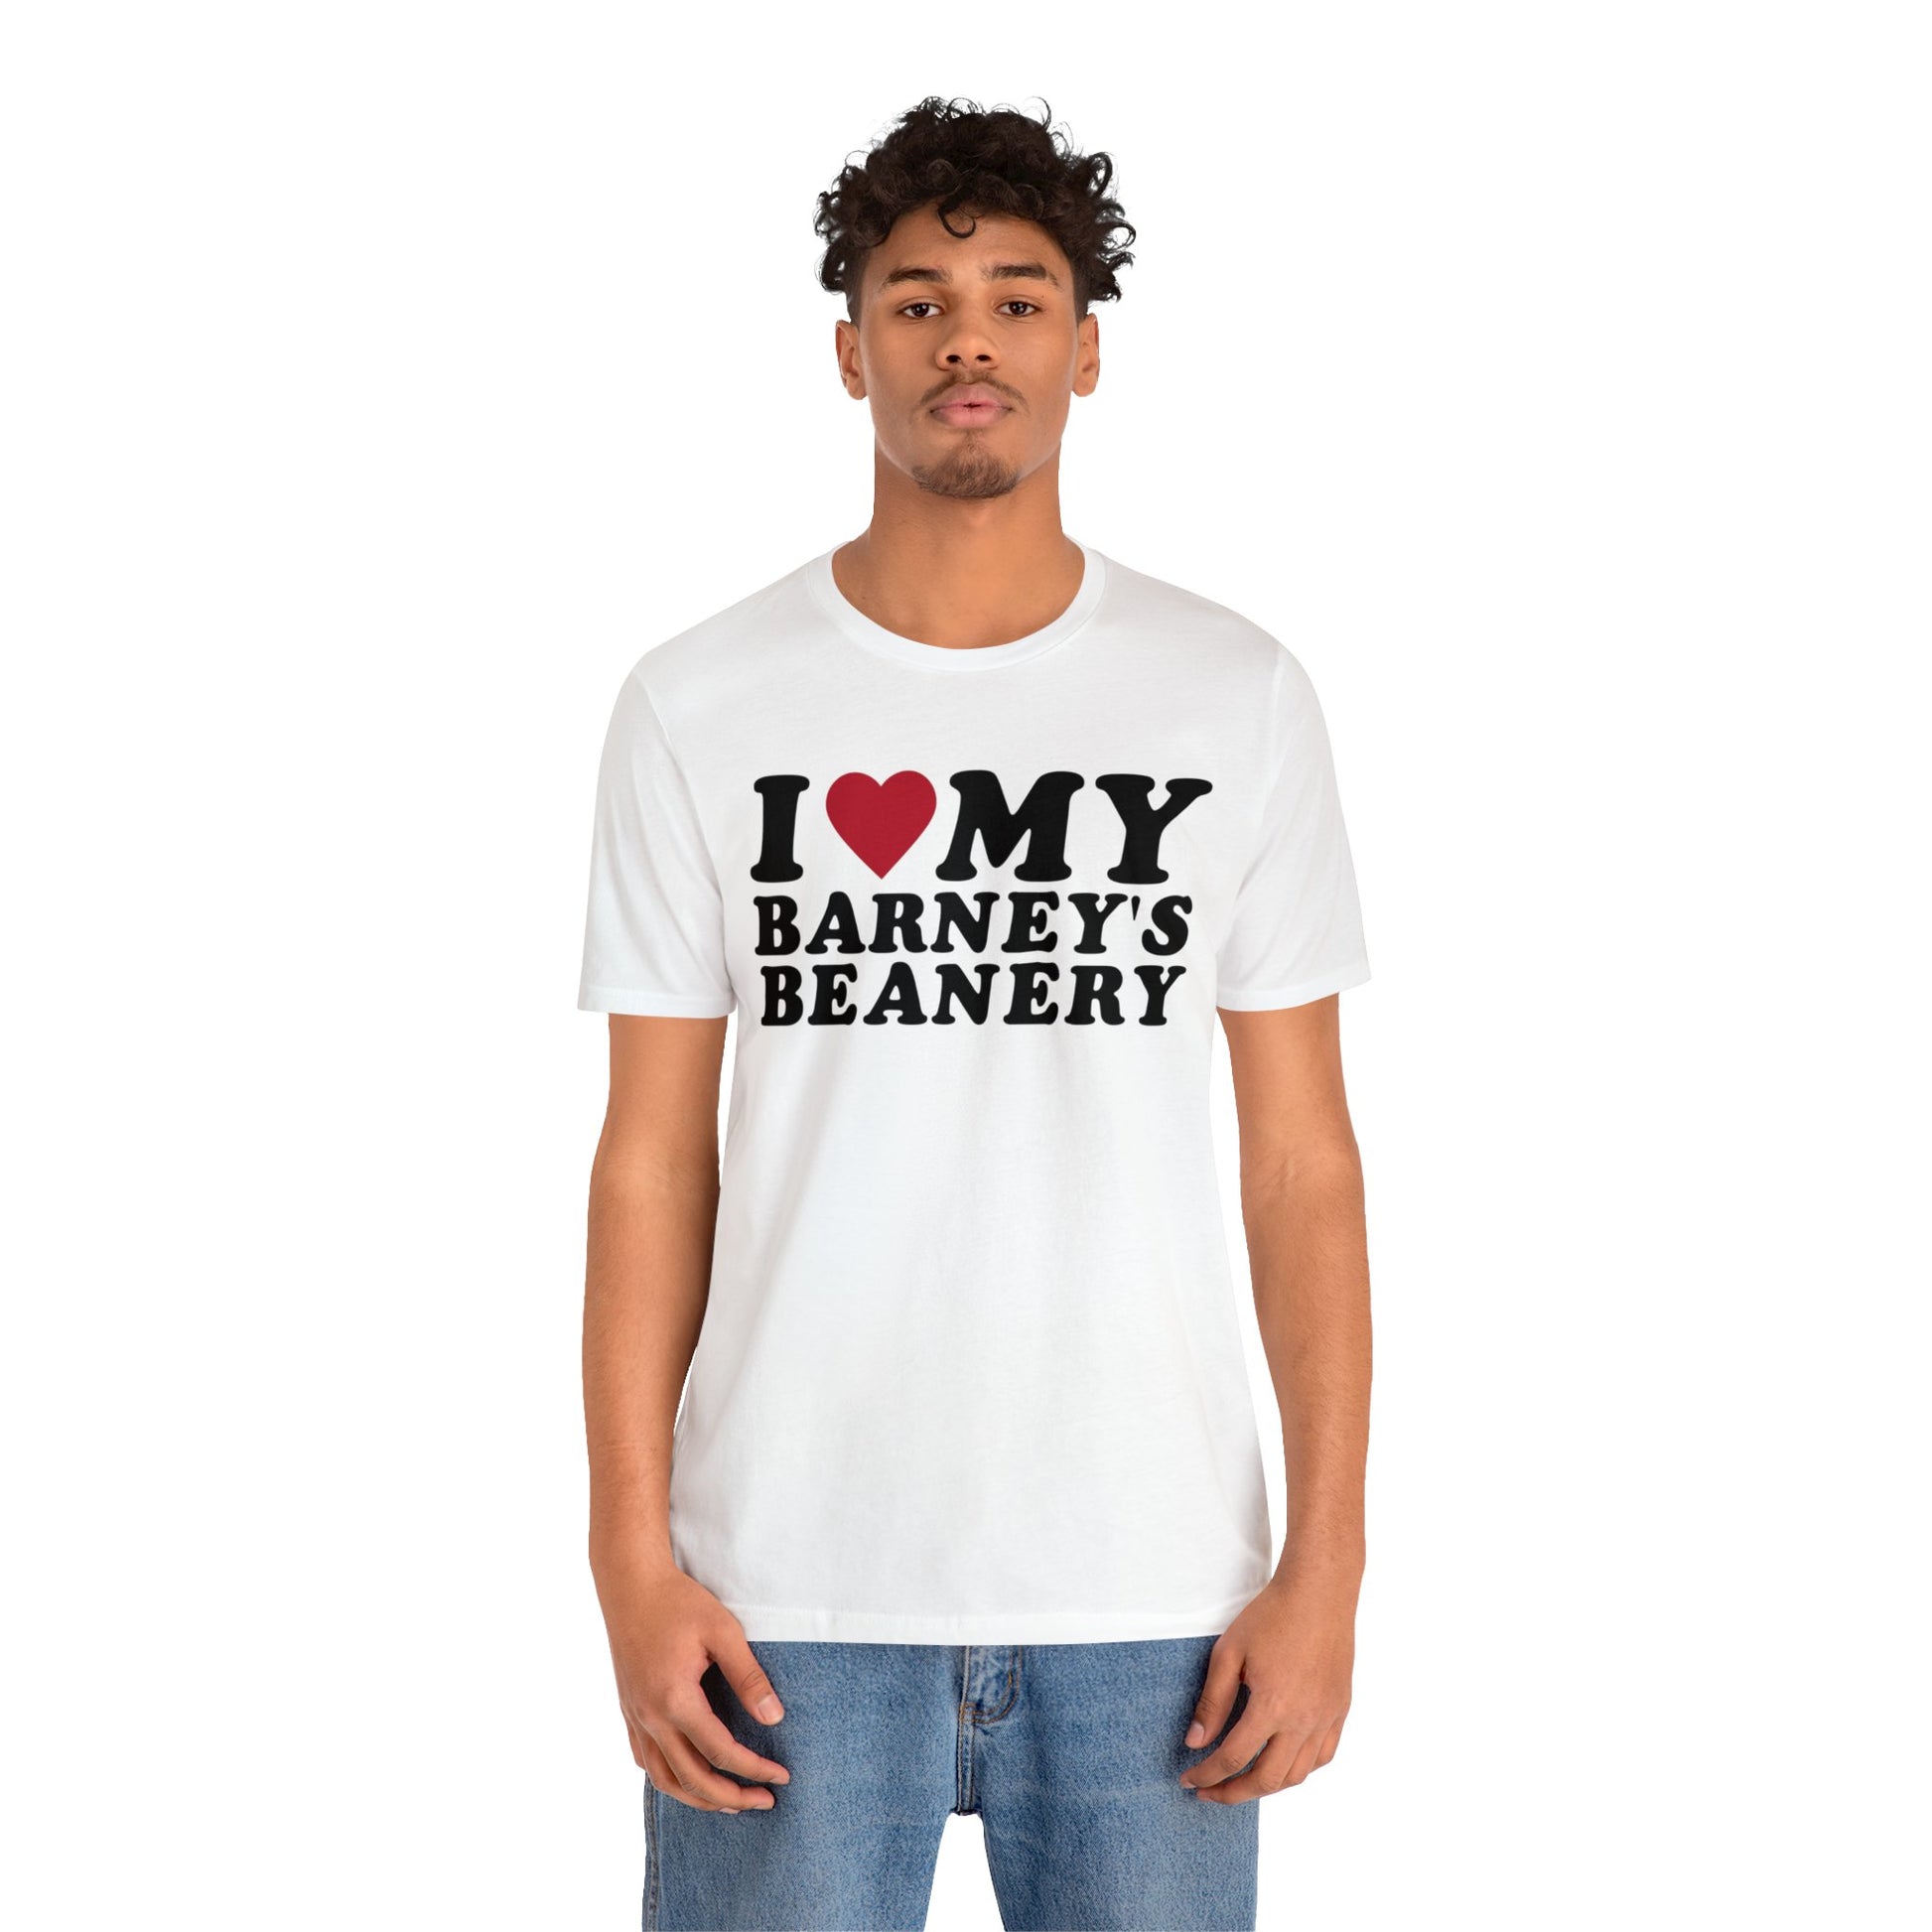 I Heart My | BARNEY'S BEANERY - Men's Graphic Tee | White And Red Graphics On White Bella+Canvas 3001 T-Shirt, Front View Male Model